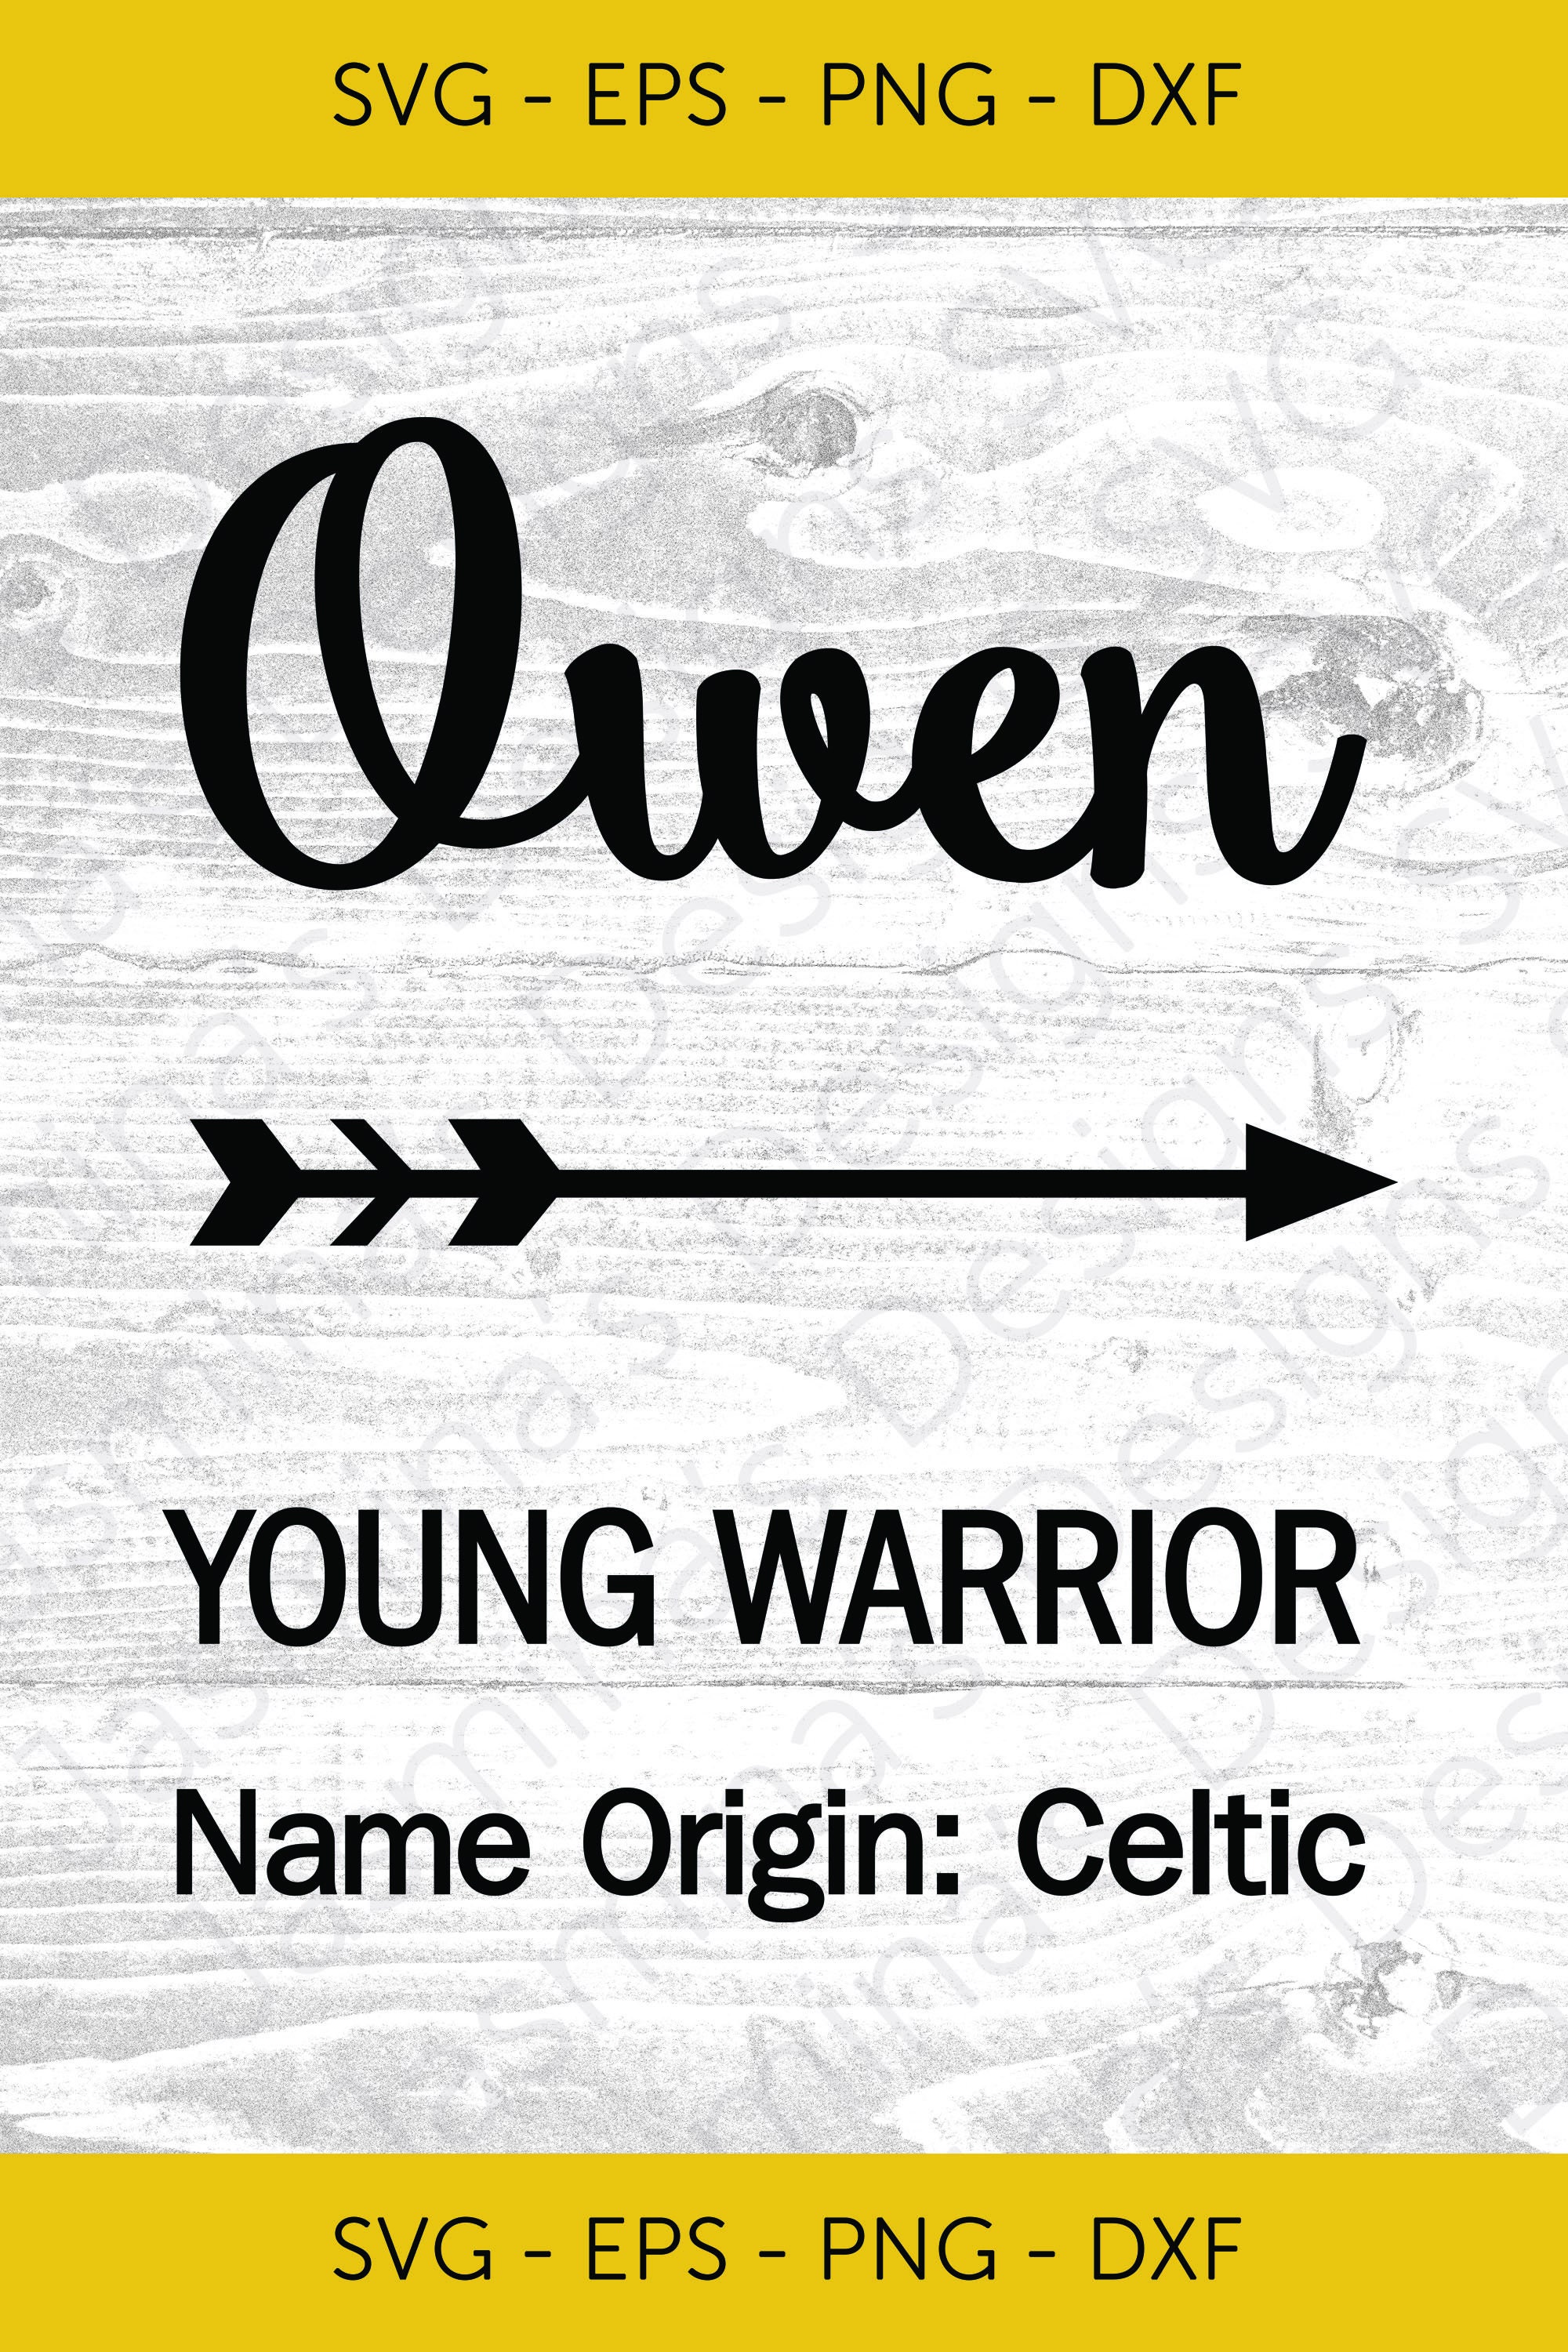 Owen Name Meaning Digital Download Image Cut File (Download Now